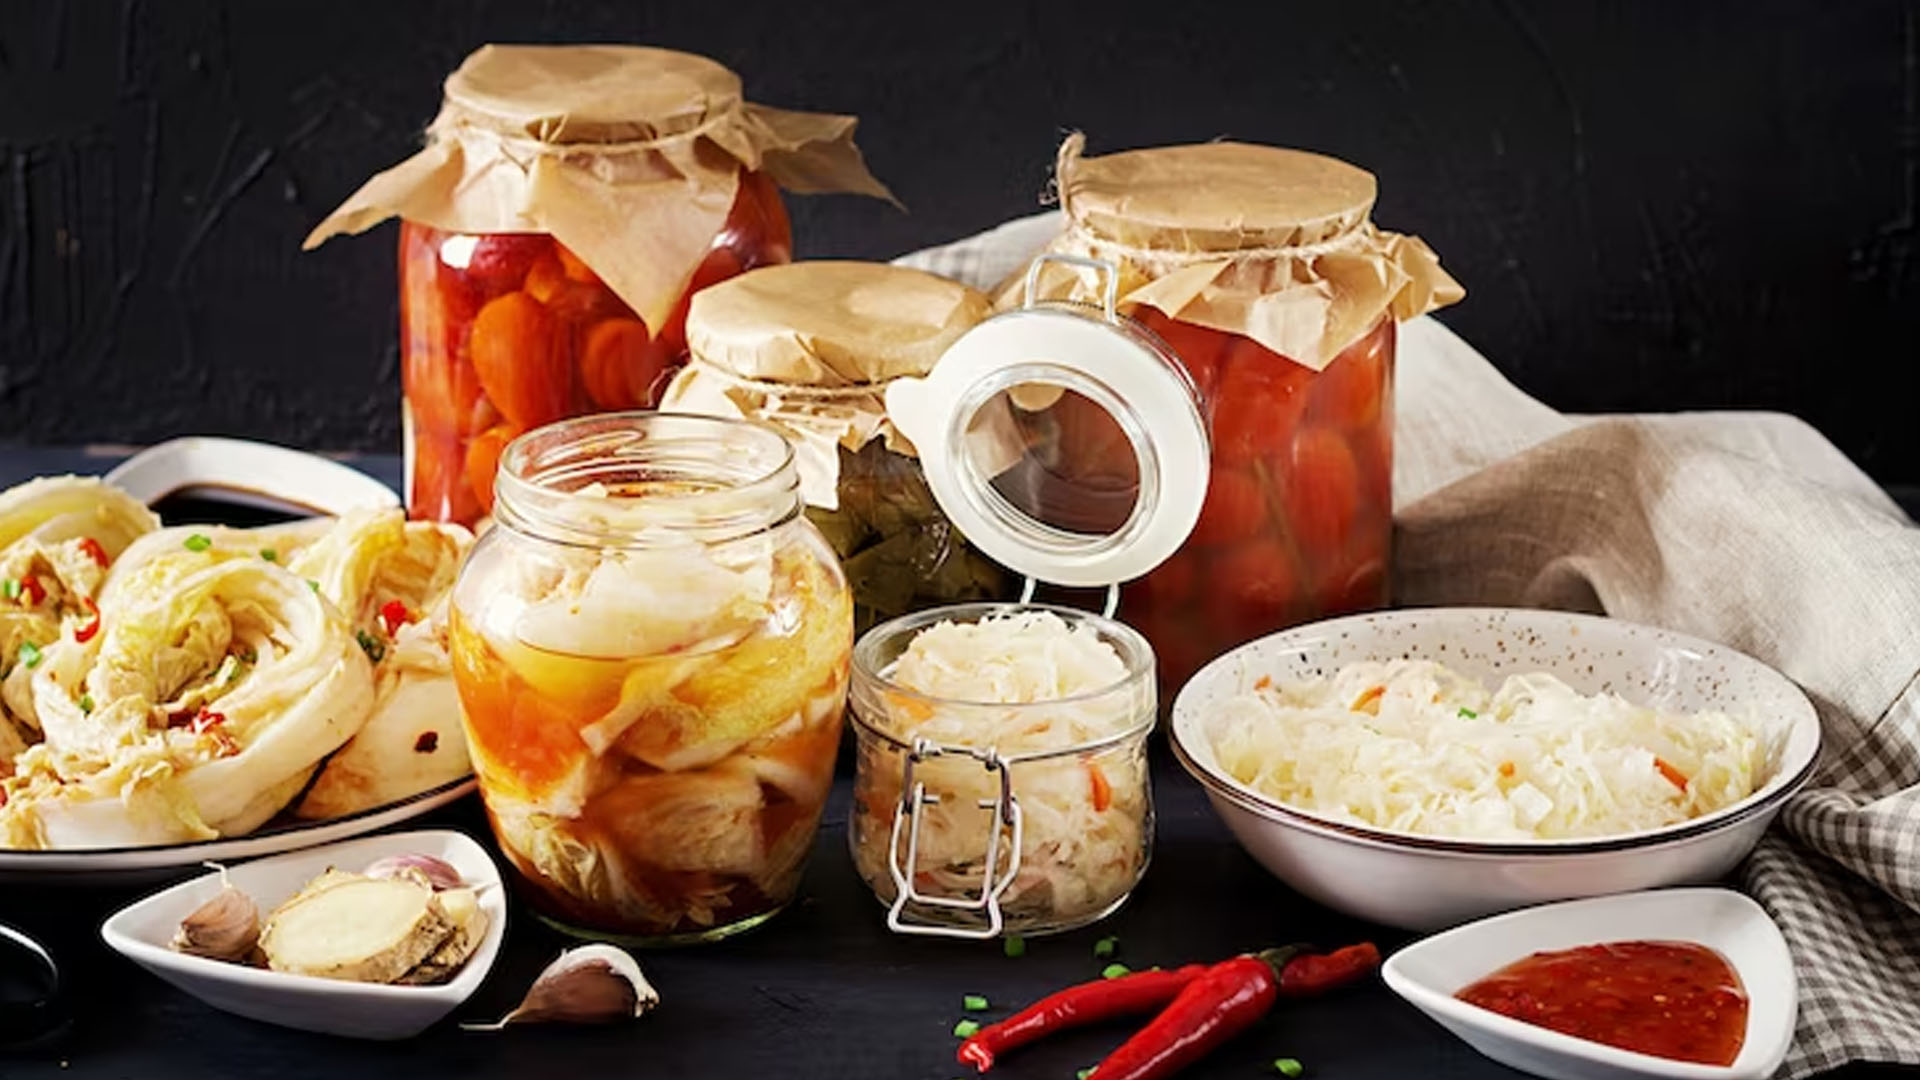 What Are The Health Benefits and Drawbacks of Fermentation?